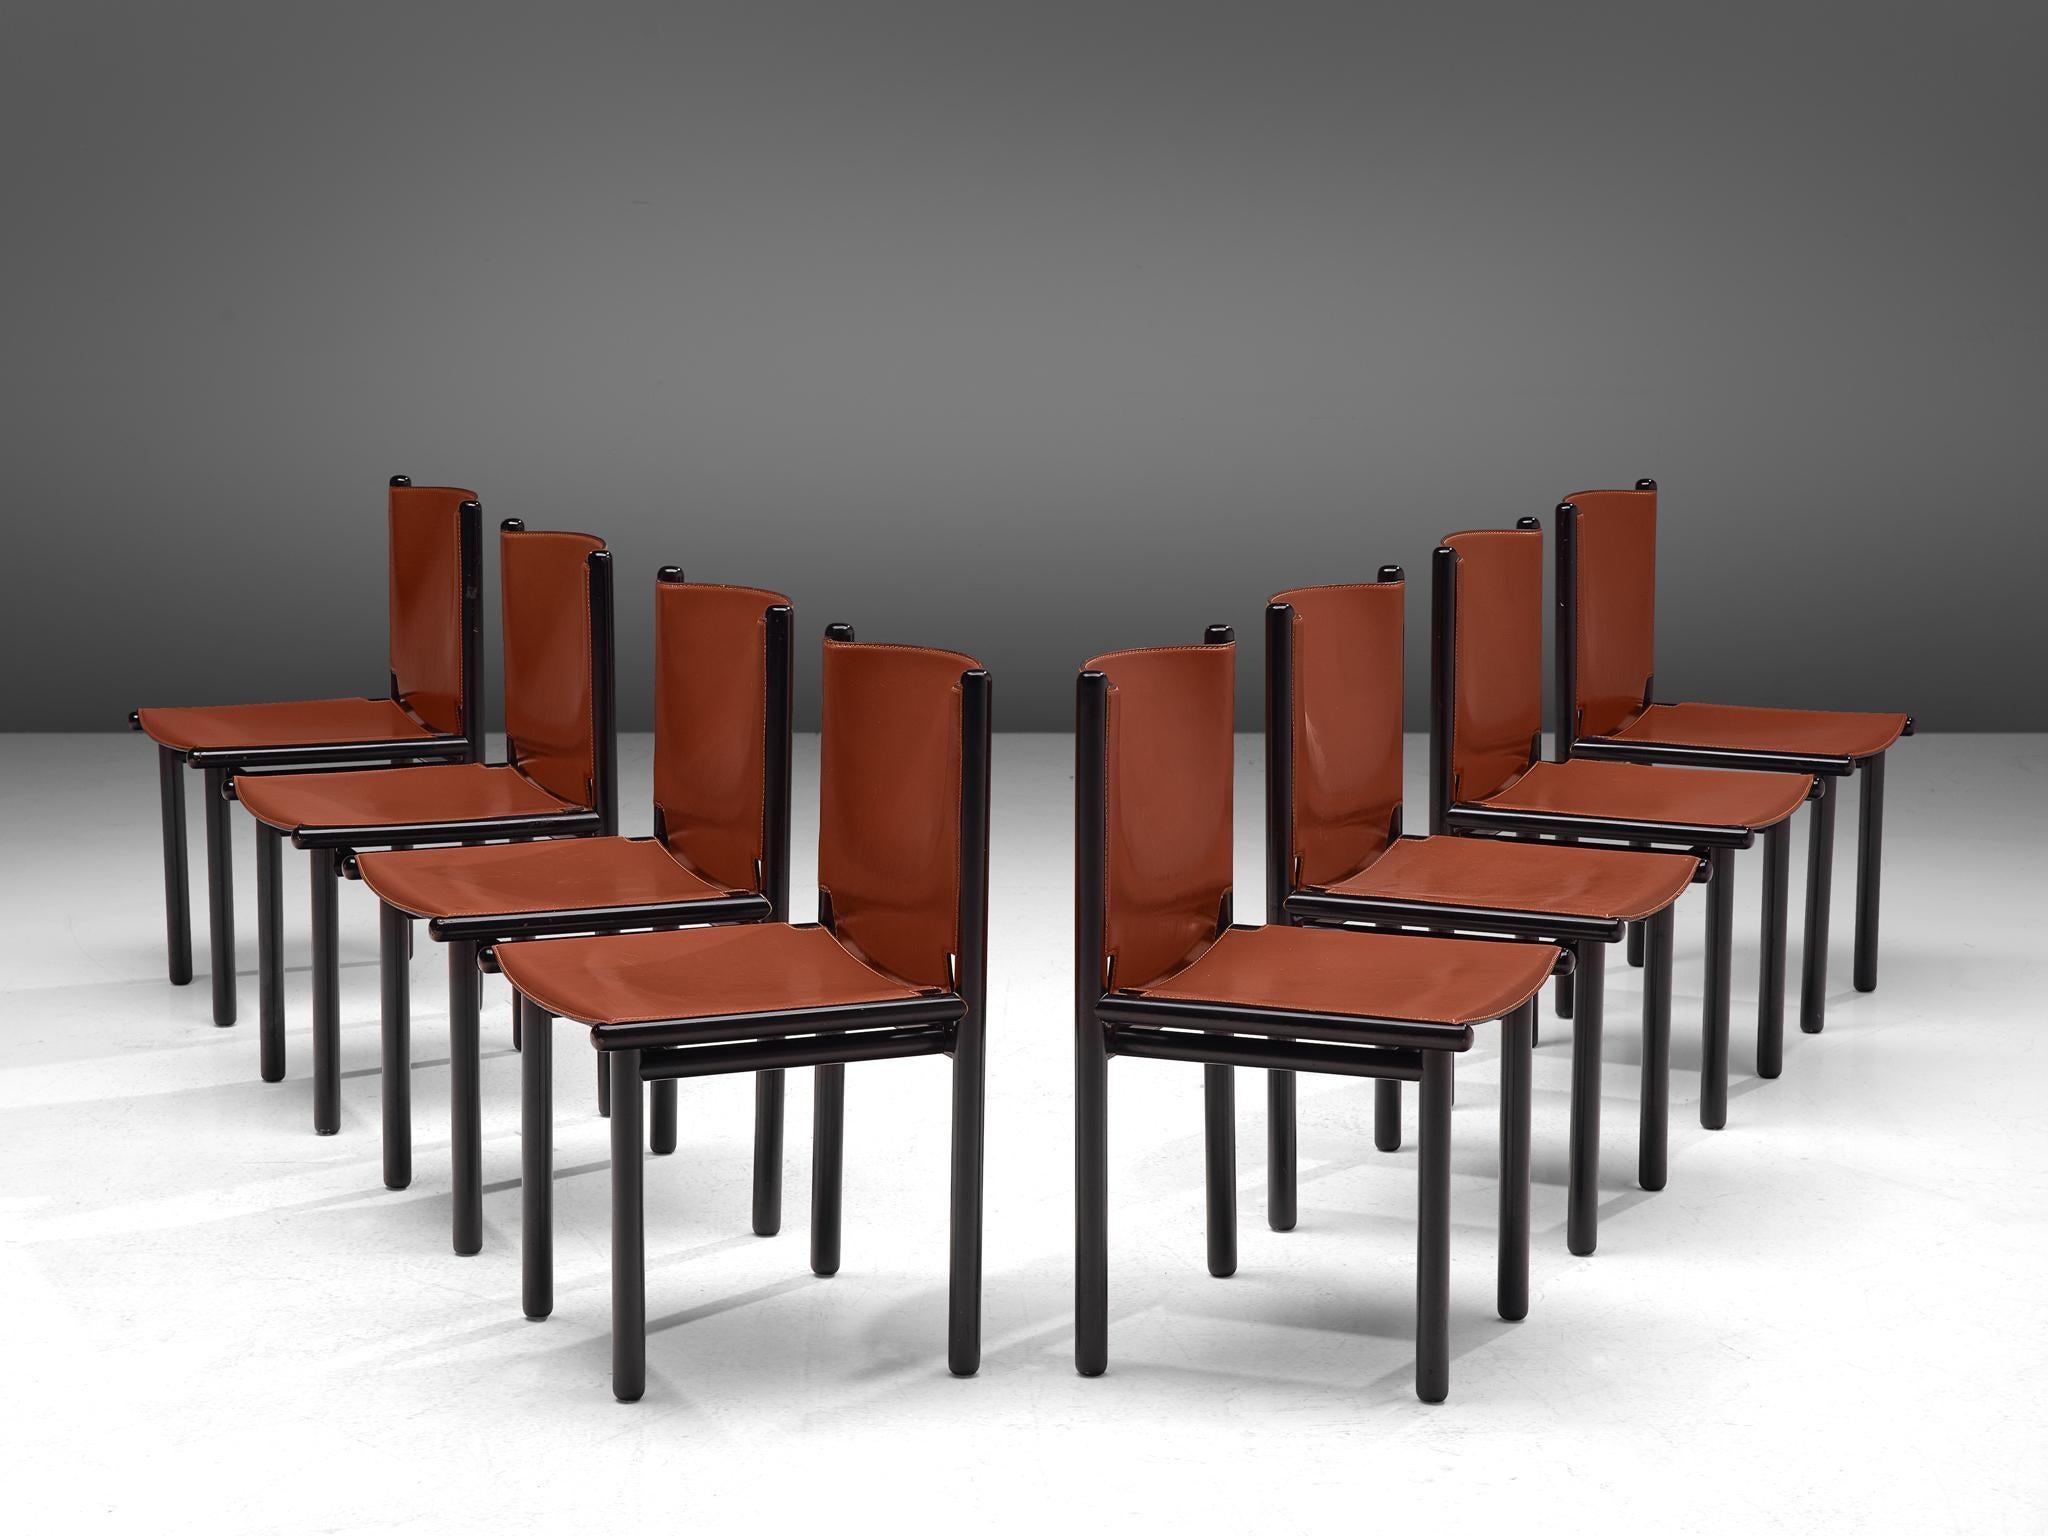 Gianfranco Frattini for Cassina, set of 8 'Caprile' dining chairs, Italy, 1985

Stunning set of eight 'Caprile' dining chairs designed by Gianfranco Frattini for Cassina in 1985. The chairs feature a strong structure with leather seats. The